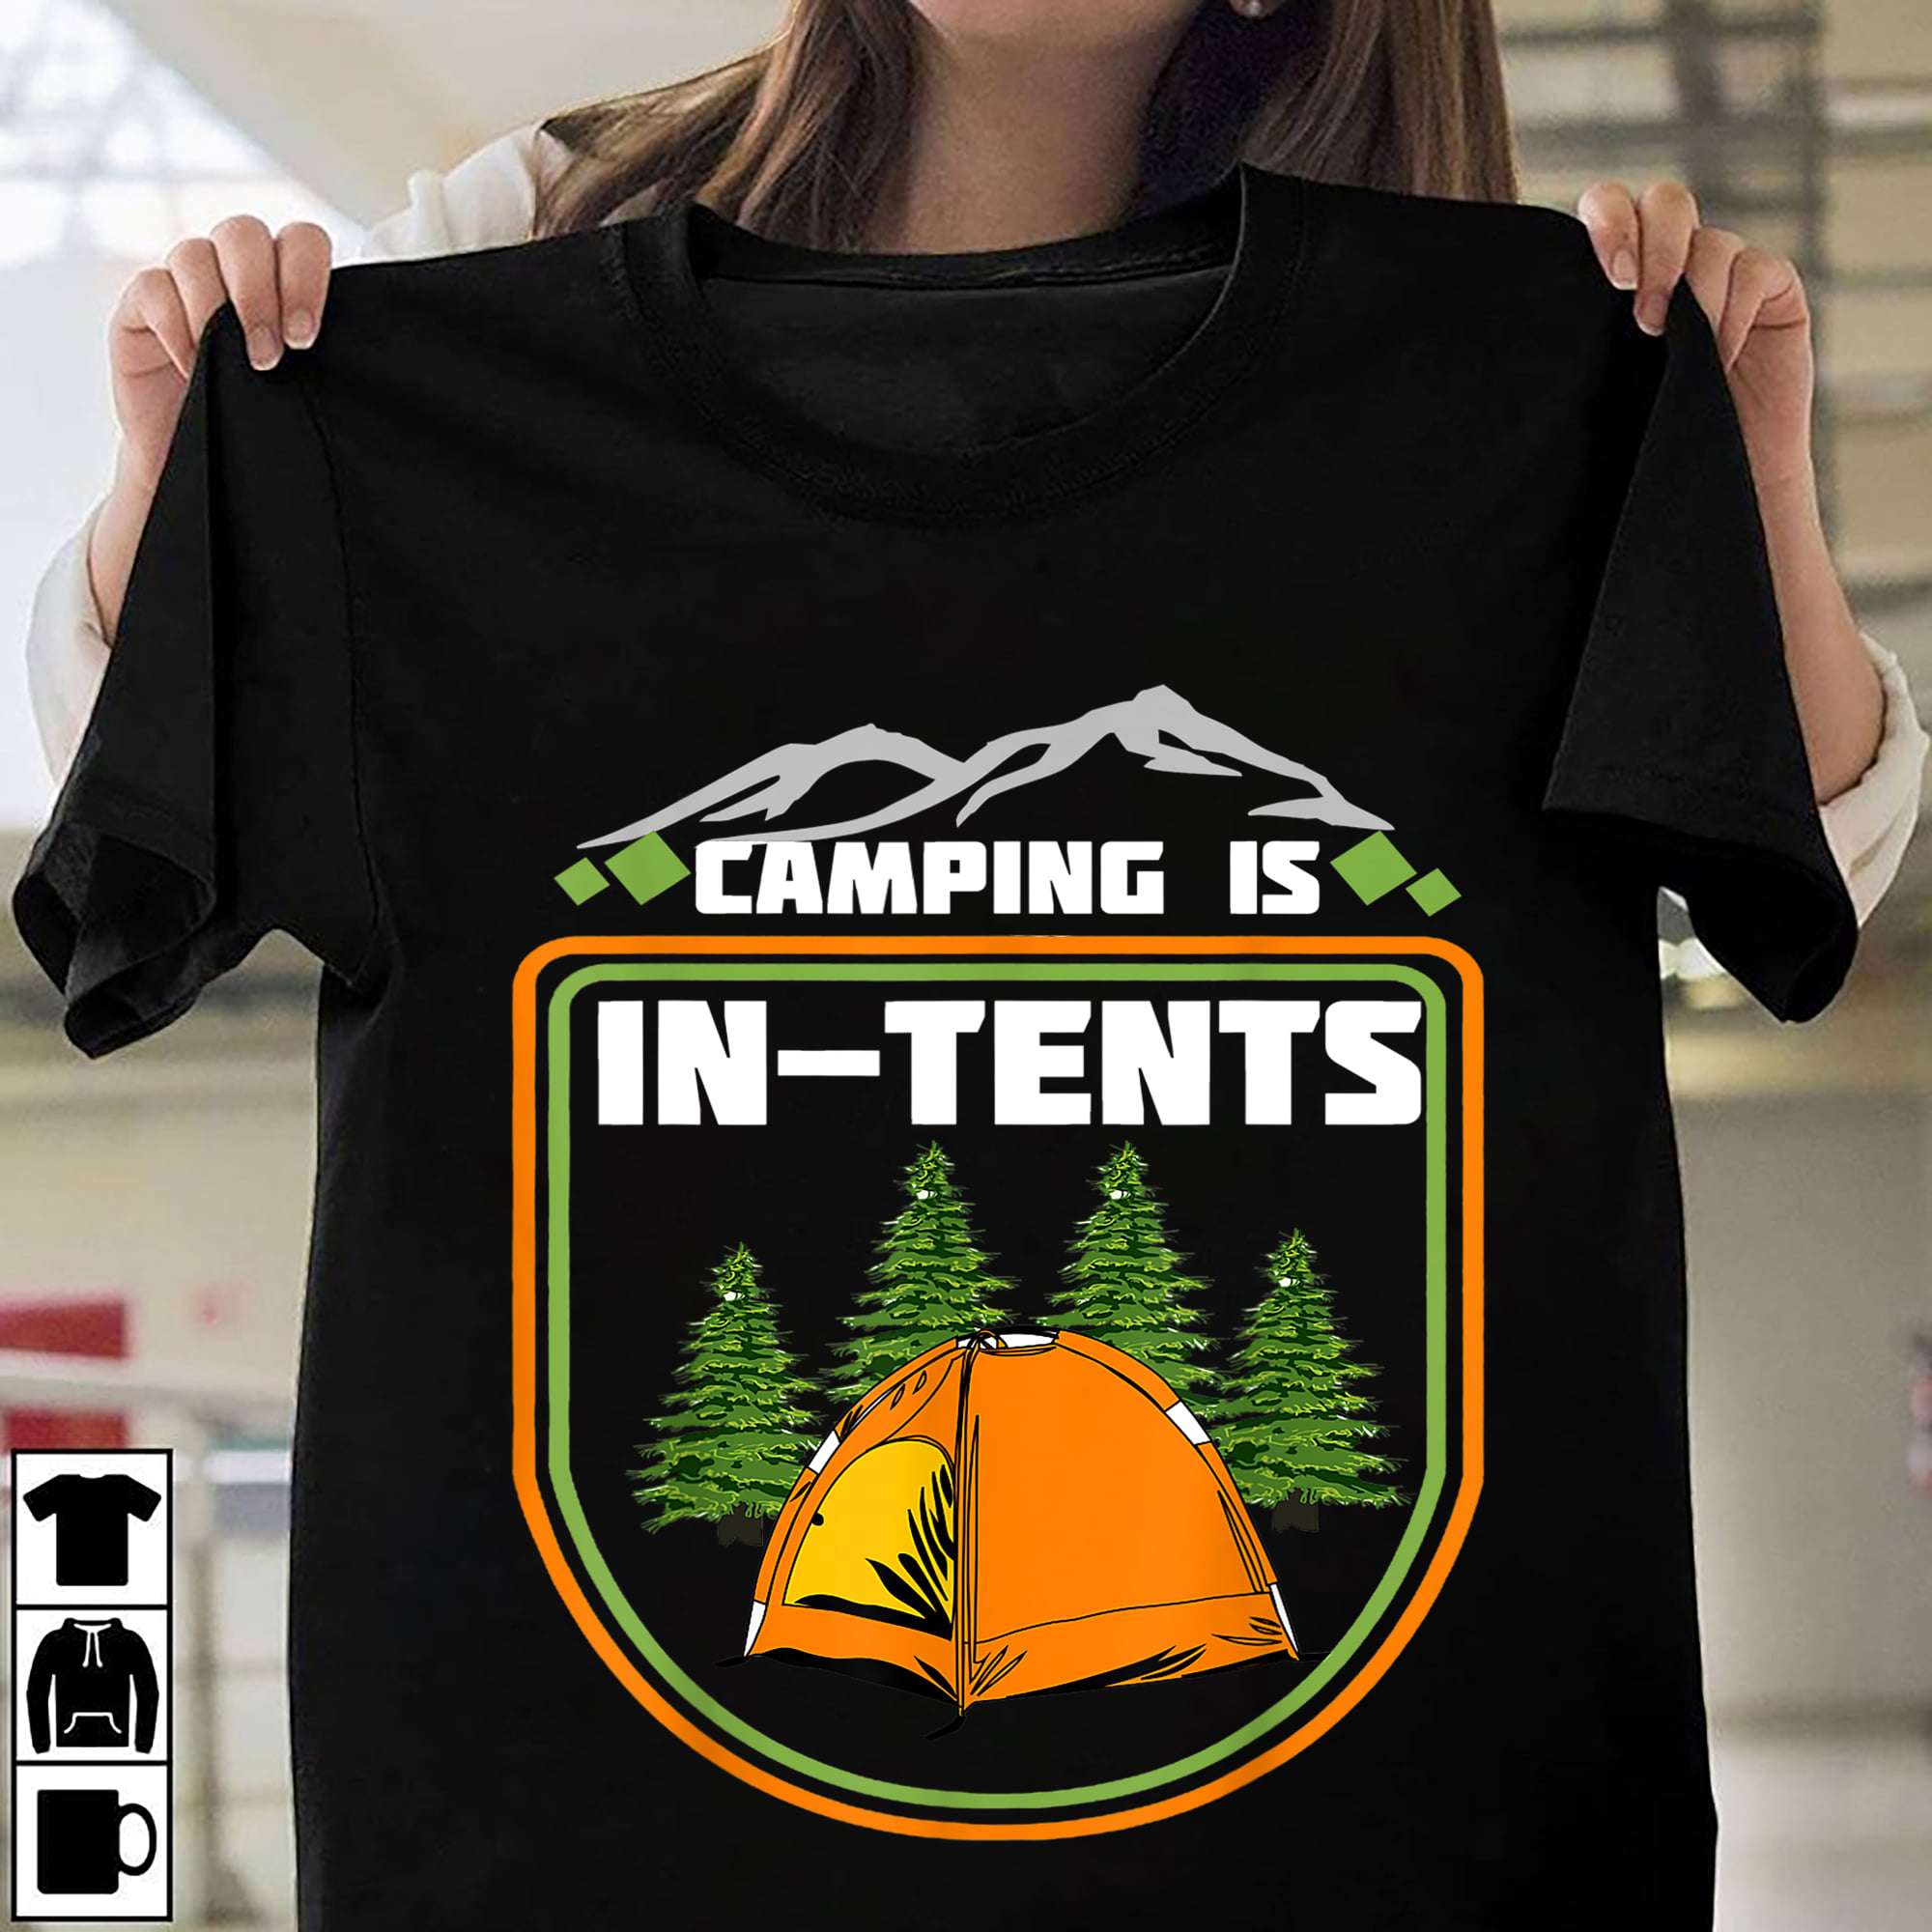 Camping is in-tents - Camping on the mountain, camping tent